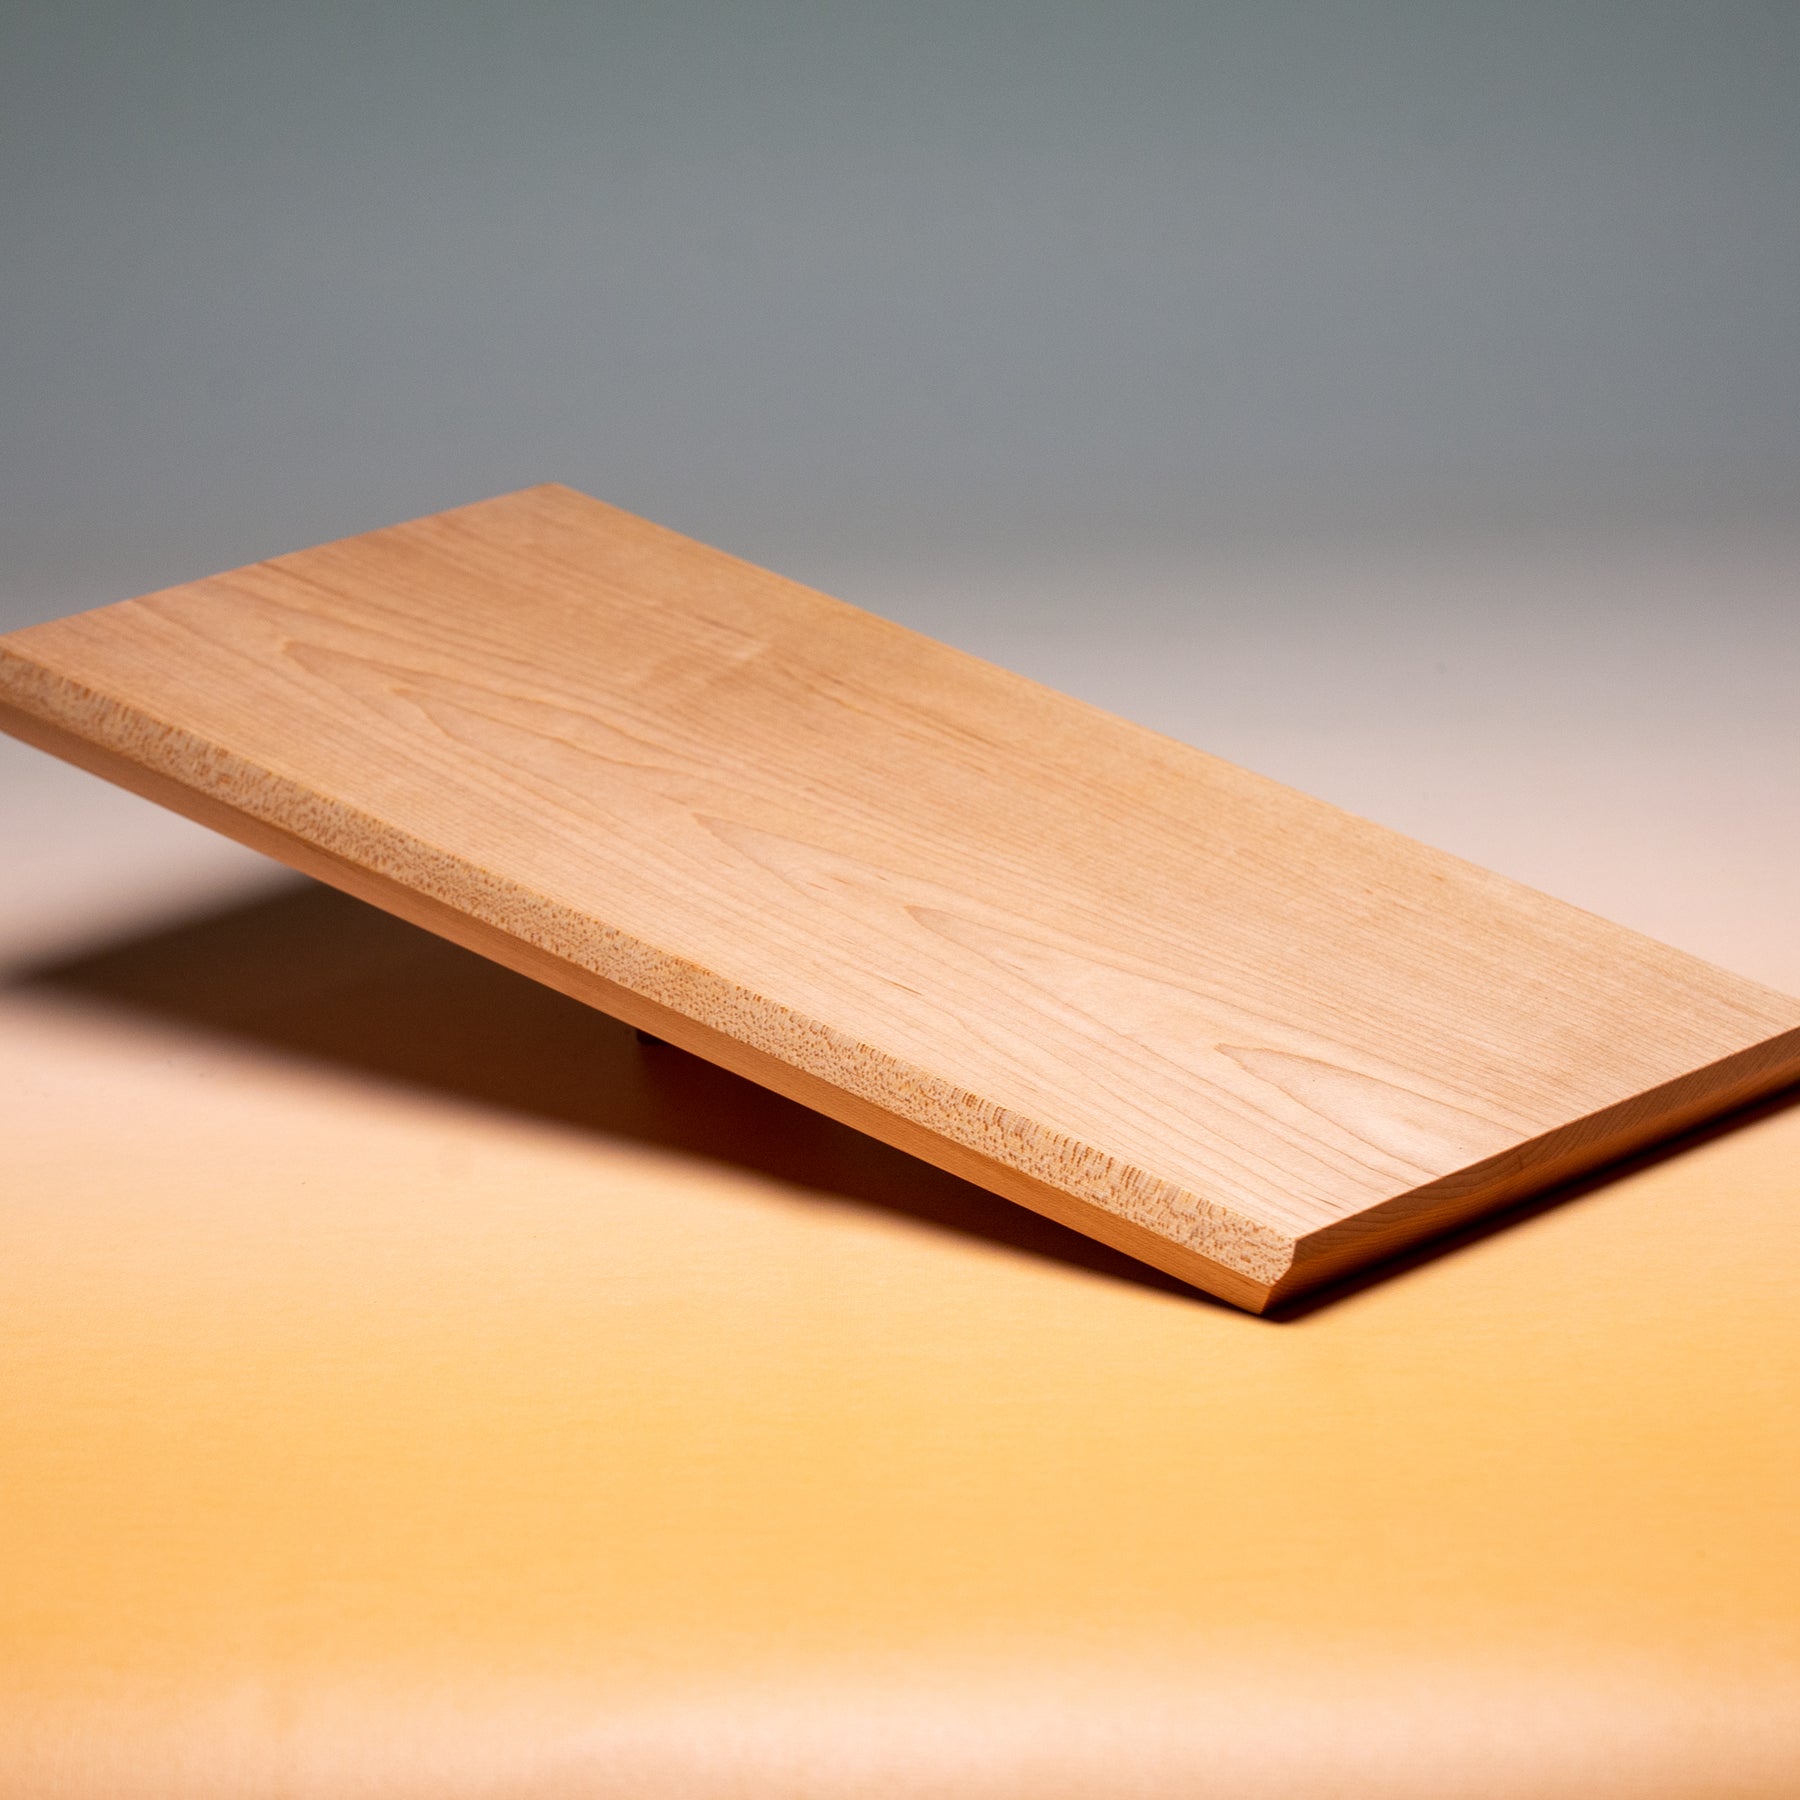 Material The Angled Board